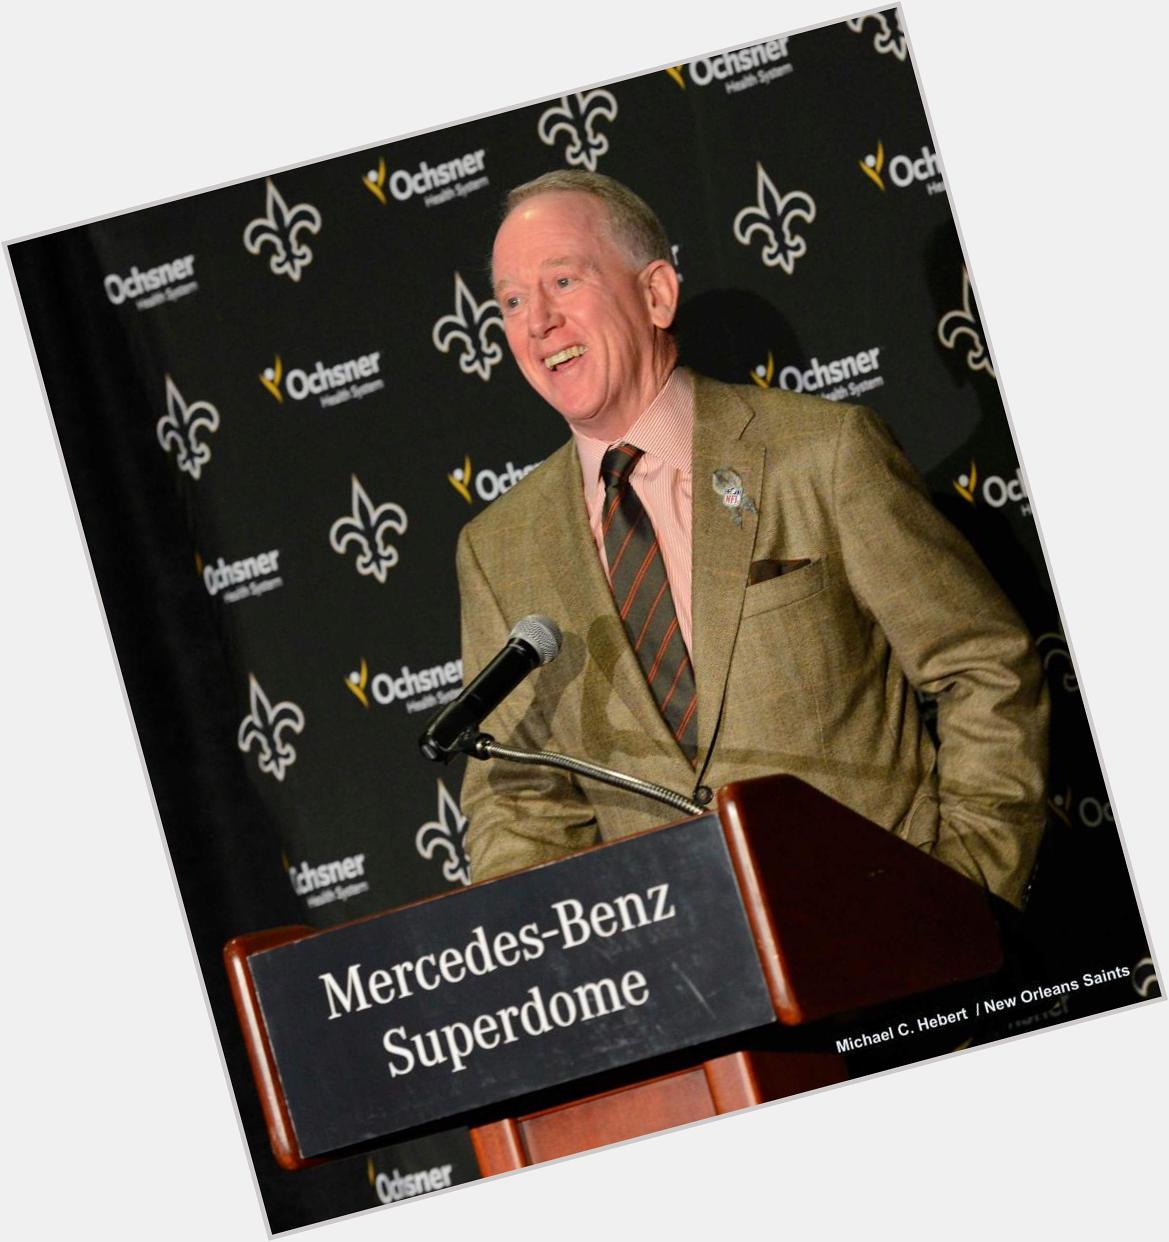 Happy birthday to you, Archie Manning!!! 